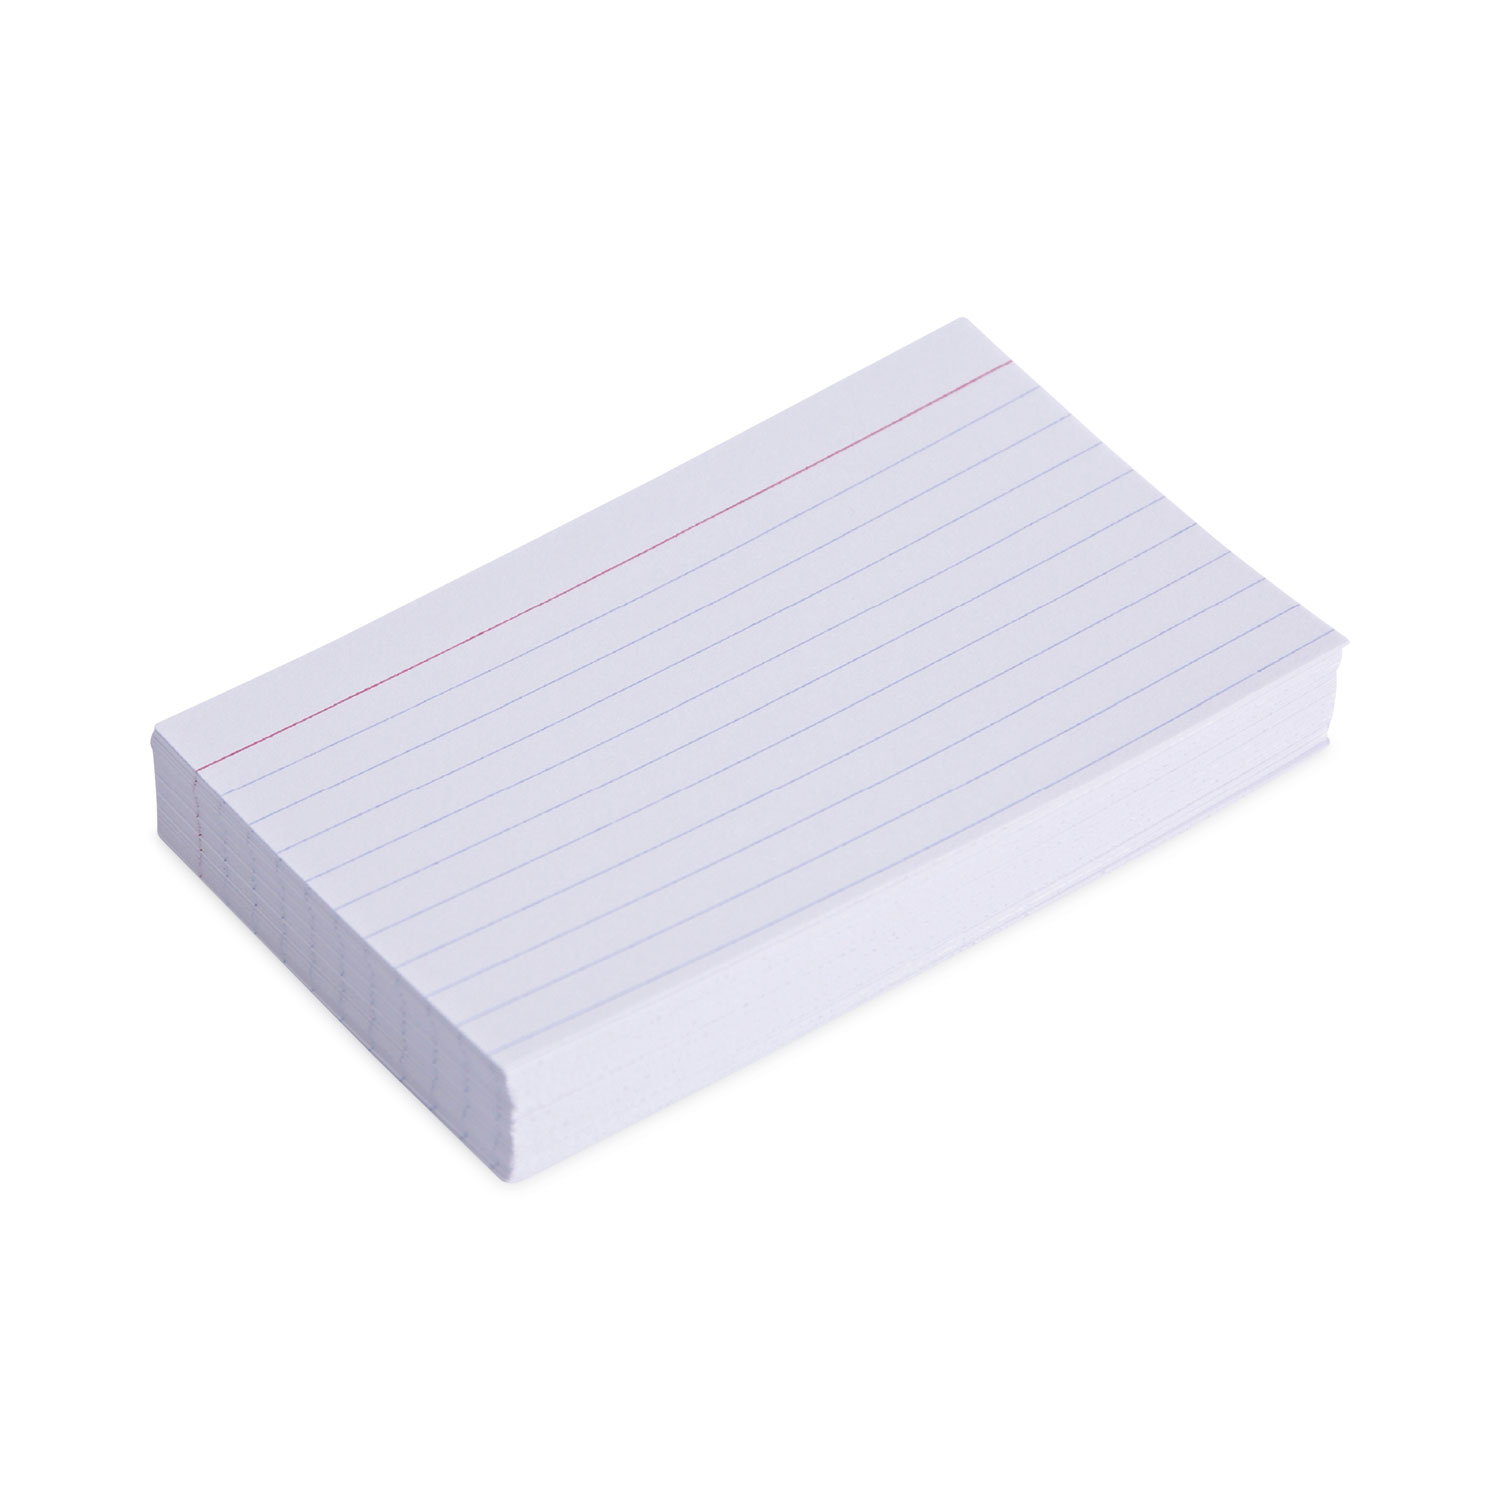 4X6, Recycled, Ruled Index Cards (White)